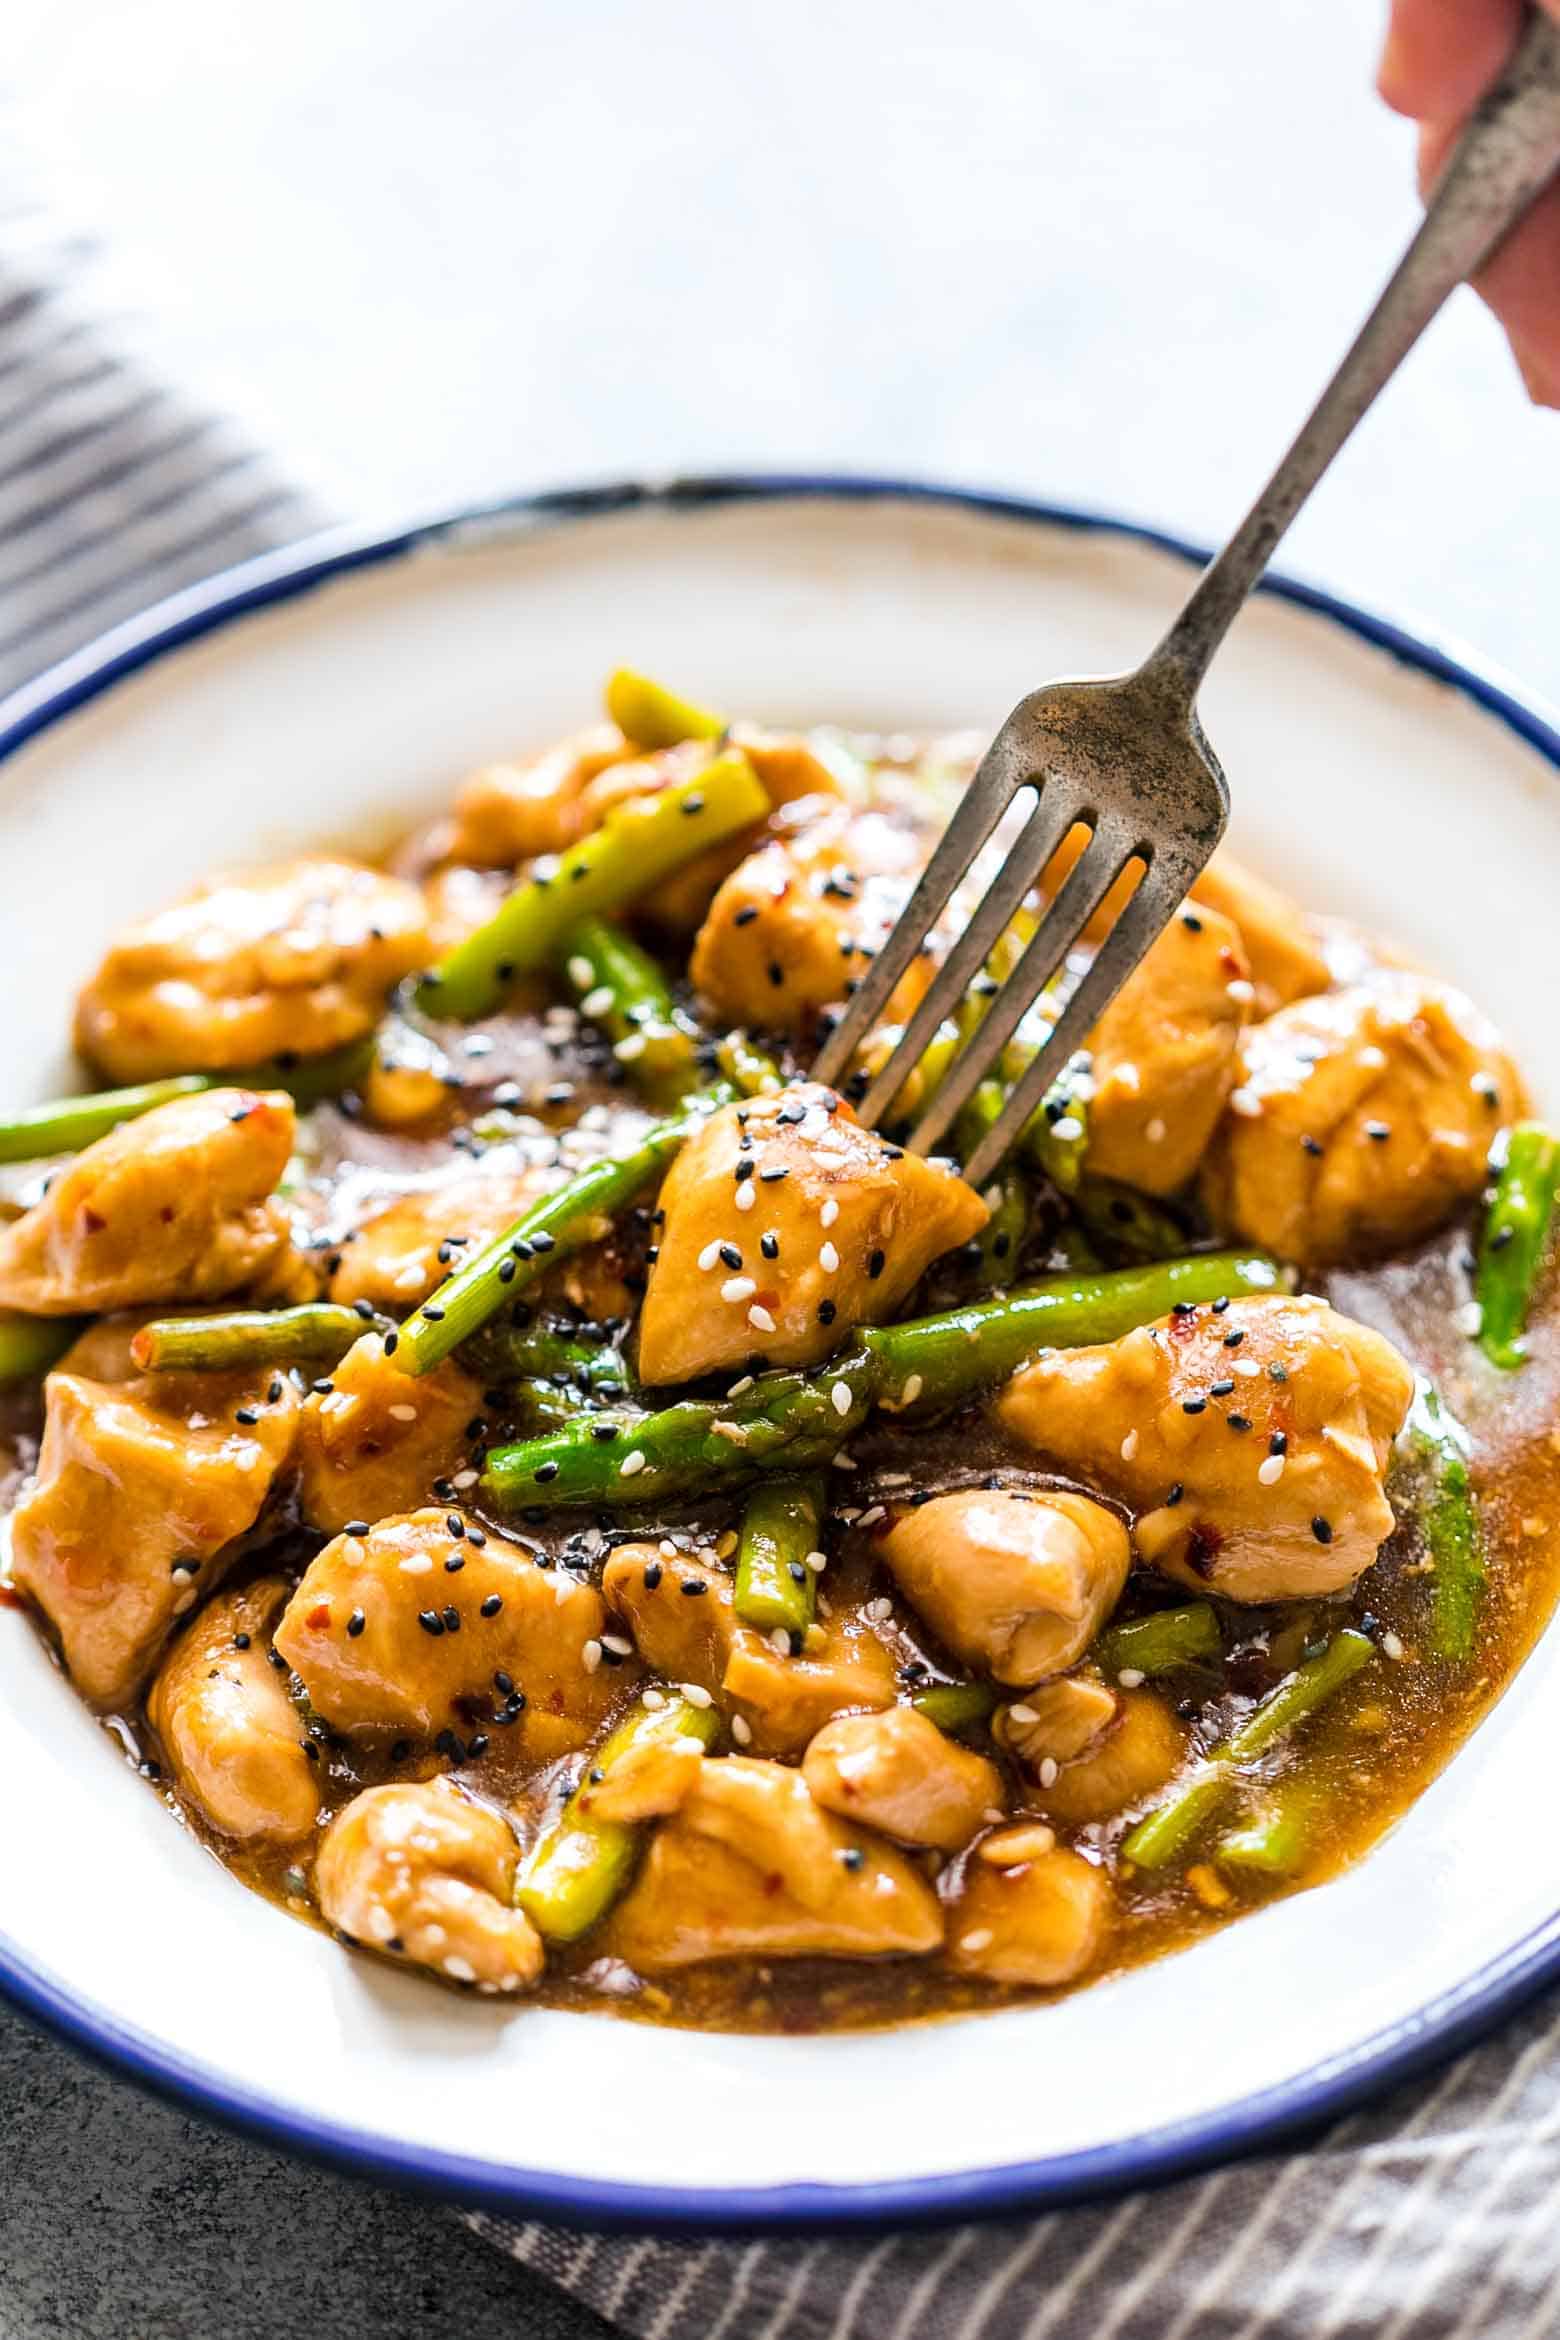 Easy lemon ginger chicken asparagus stir fry is a quick, 30 minute asian recipe that's sure to be a hit with the family. It's low carb and can gluten free too so you can enjoy it guilt-free!